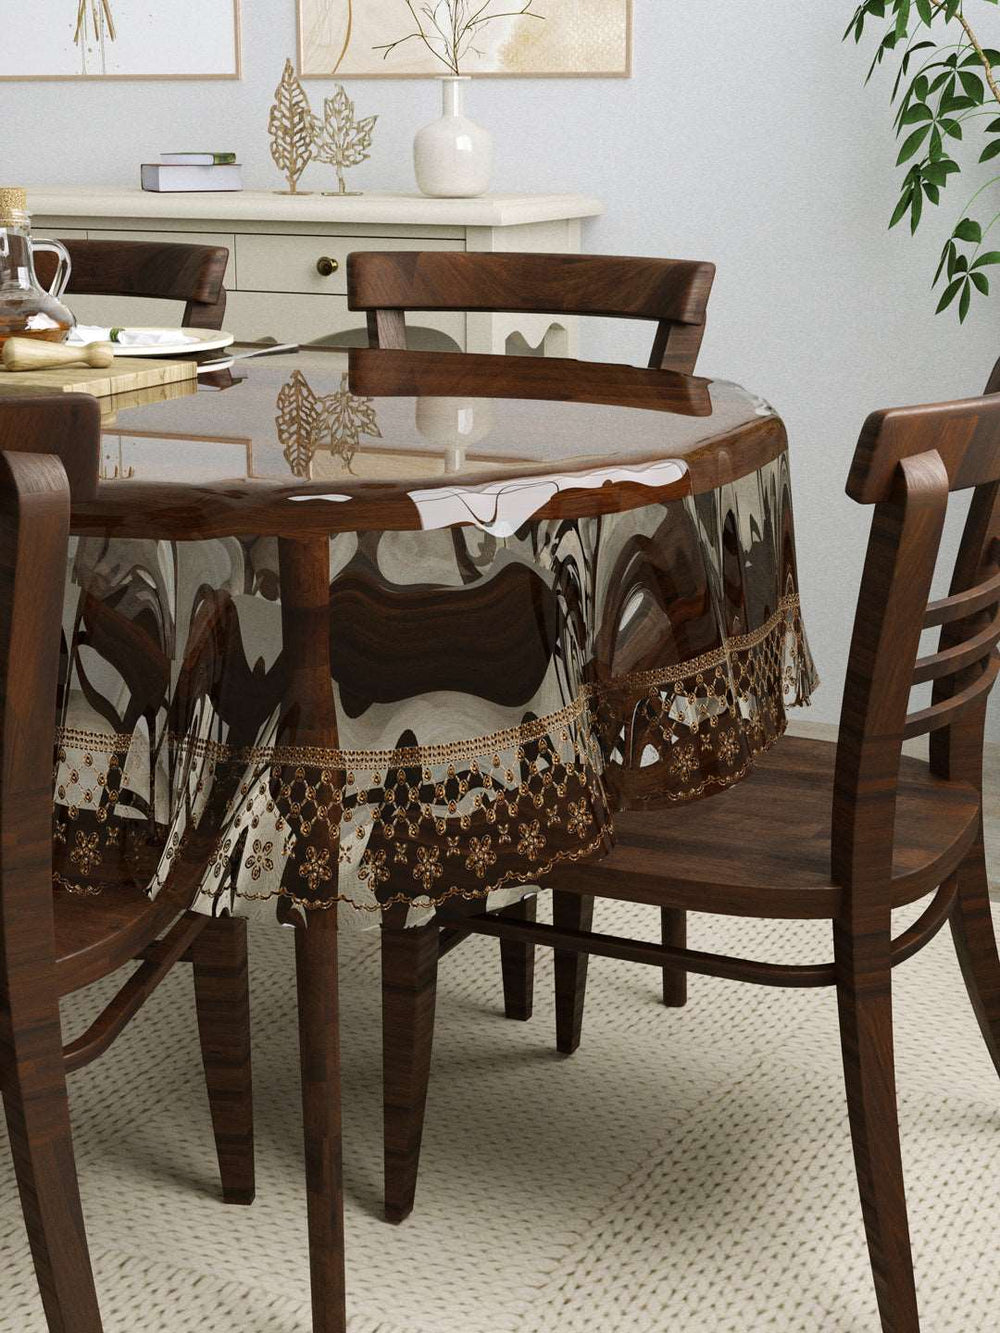 8 Seater Oval Anti Slip Transparent Table Cover; Material PVC; 60x108 Inches ; Brown Tipping Lace